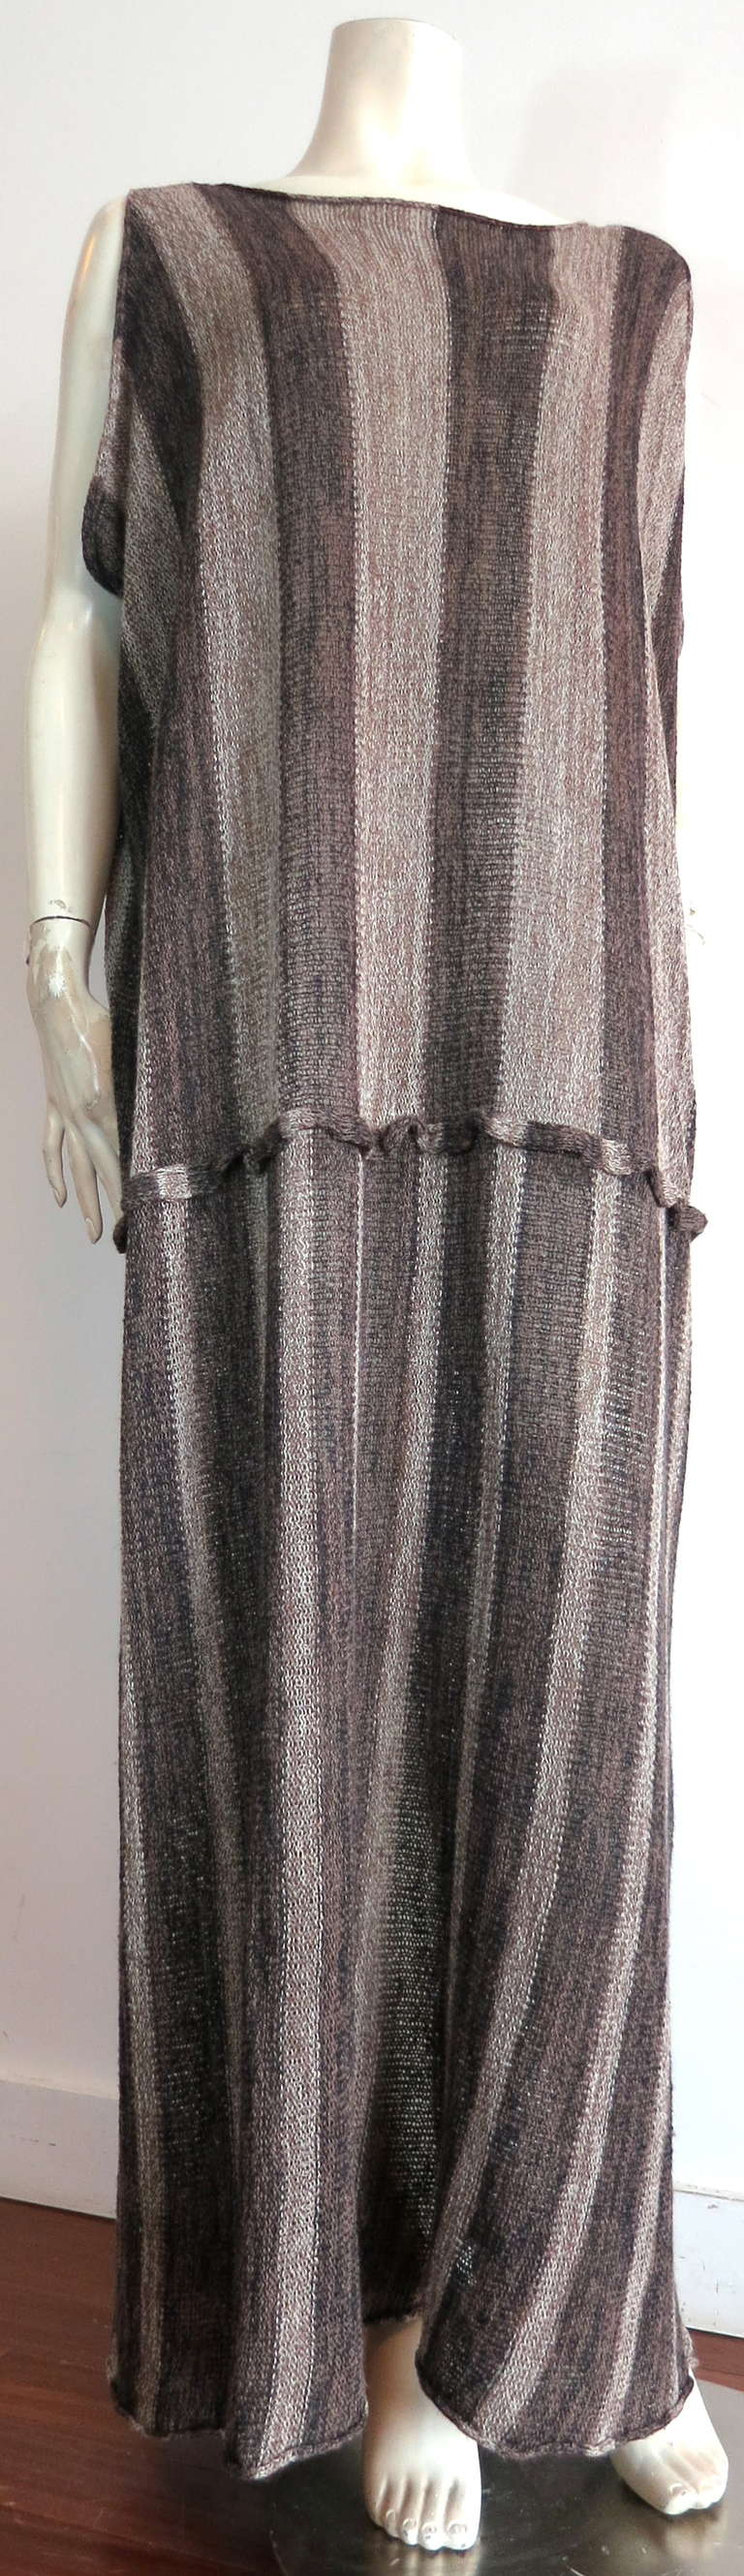 Vintage ISSEY MIYAKE Linen sweater knit dress.

This stunning dress was designed by Issey Miyake during the 1980's in Japan.

The dress features an airy, linen & nylon sweater knit fabrication perfect for Spring/Summer.  Gradient style vertical